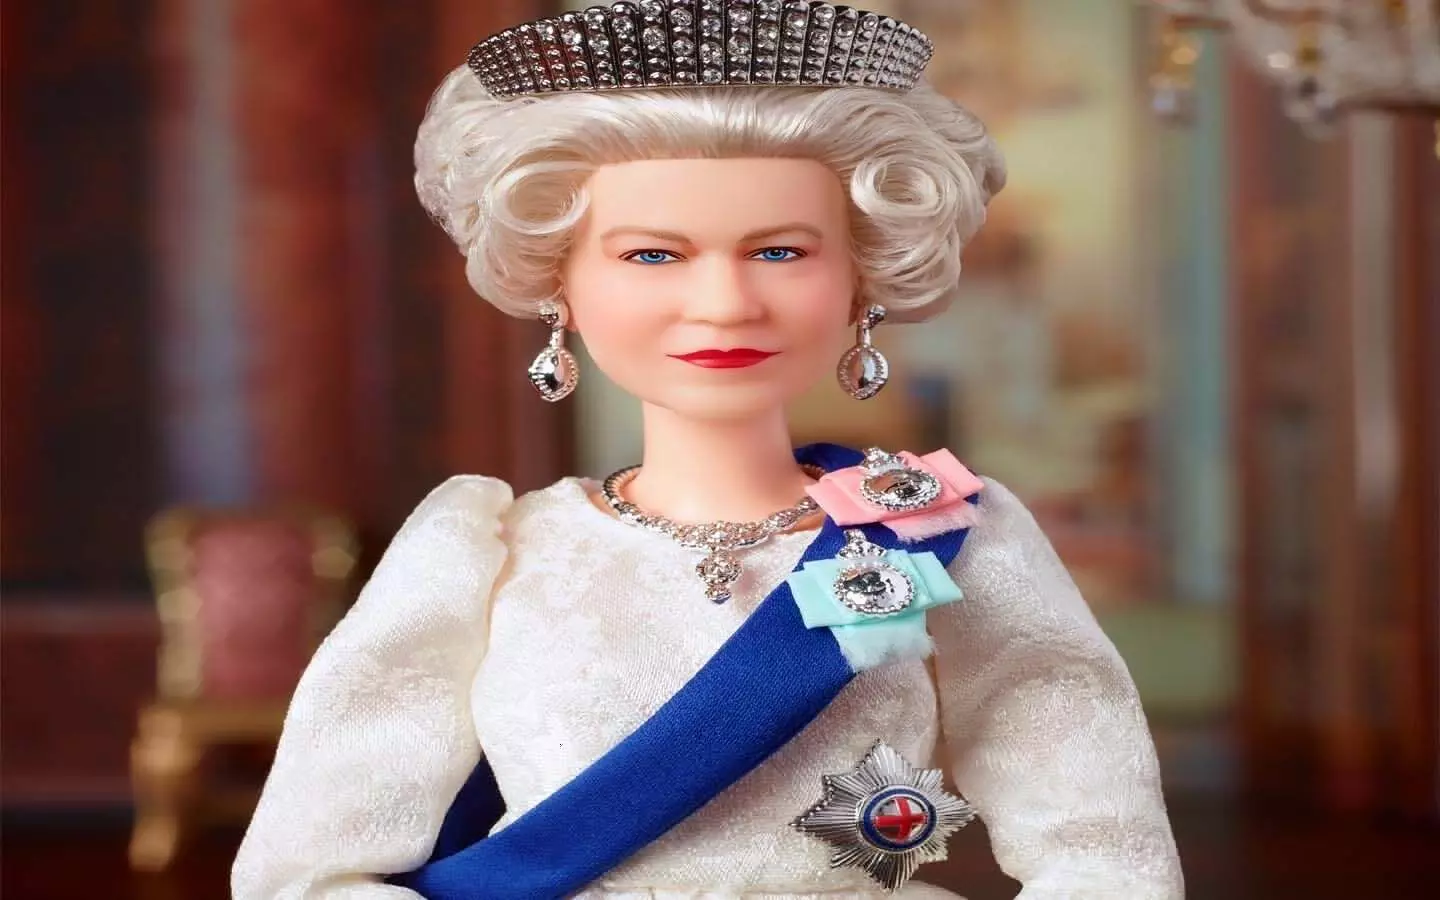 Queen Barbie doll sold out in 3 seconds, huge online demand